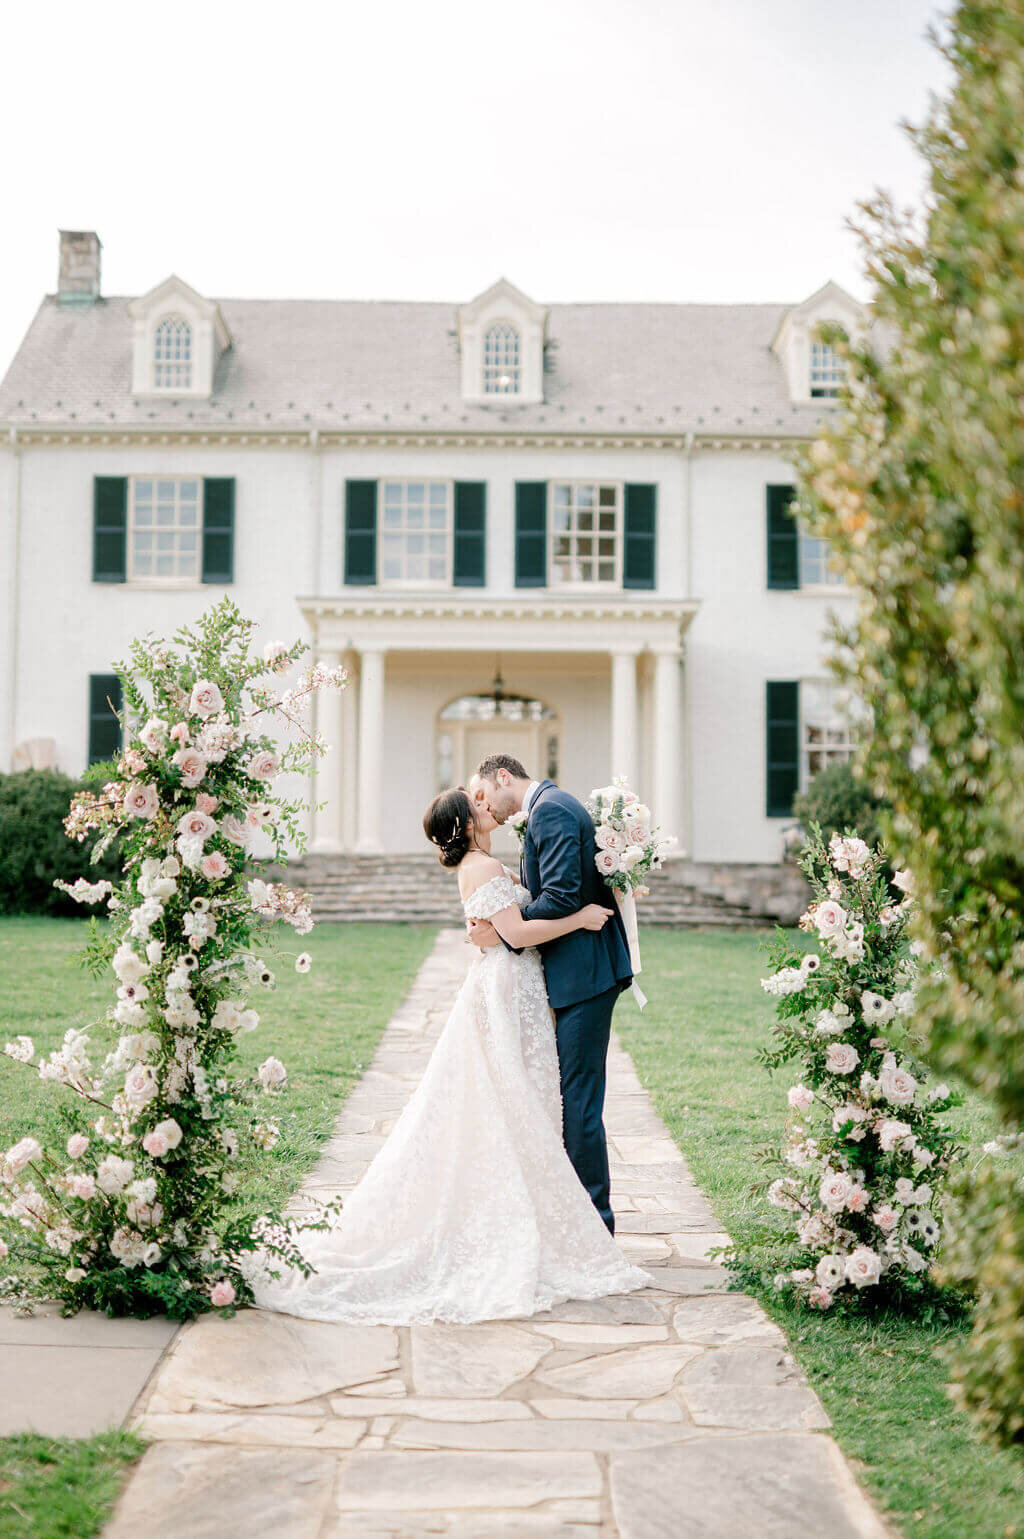 Kissing  wedding photo of bride and groom at Rust Manor house with flower arch